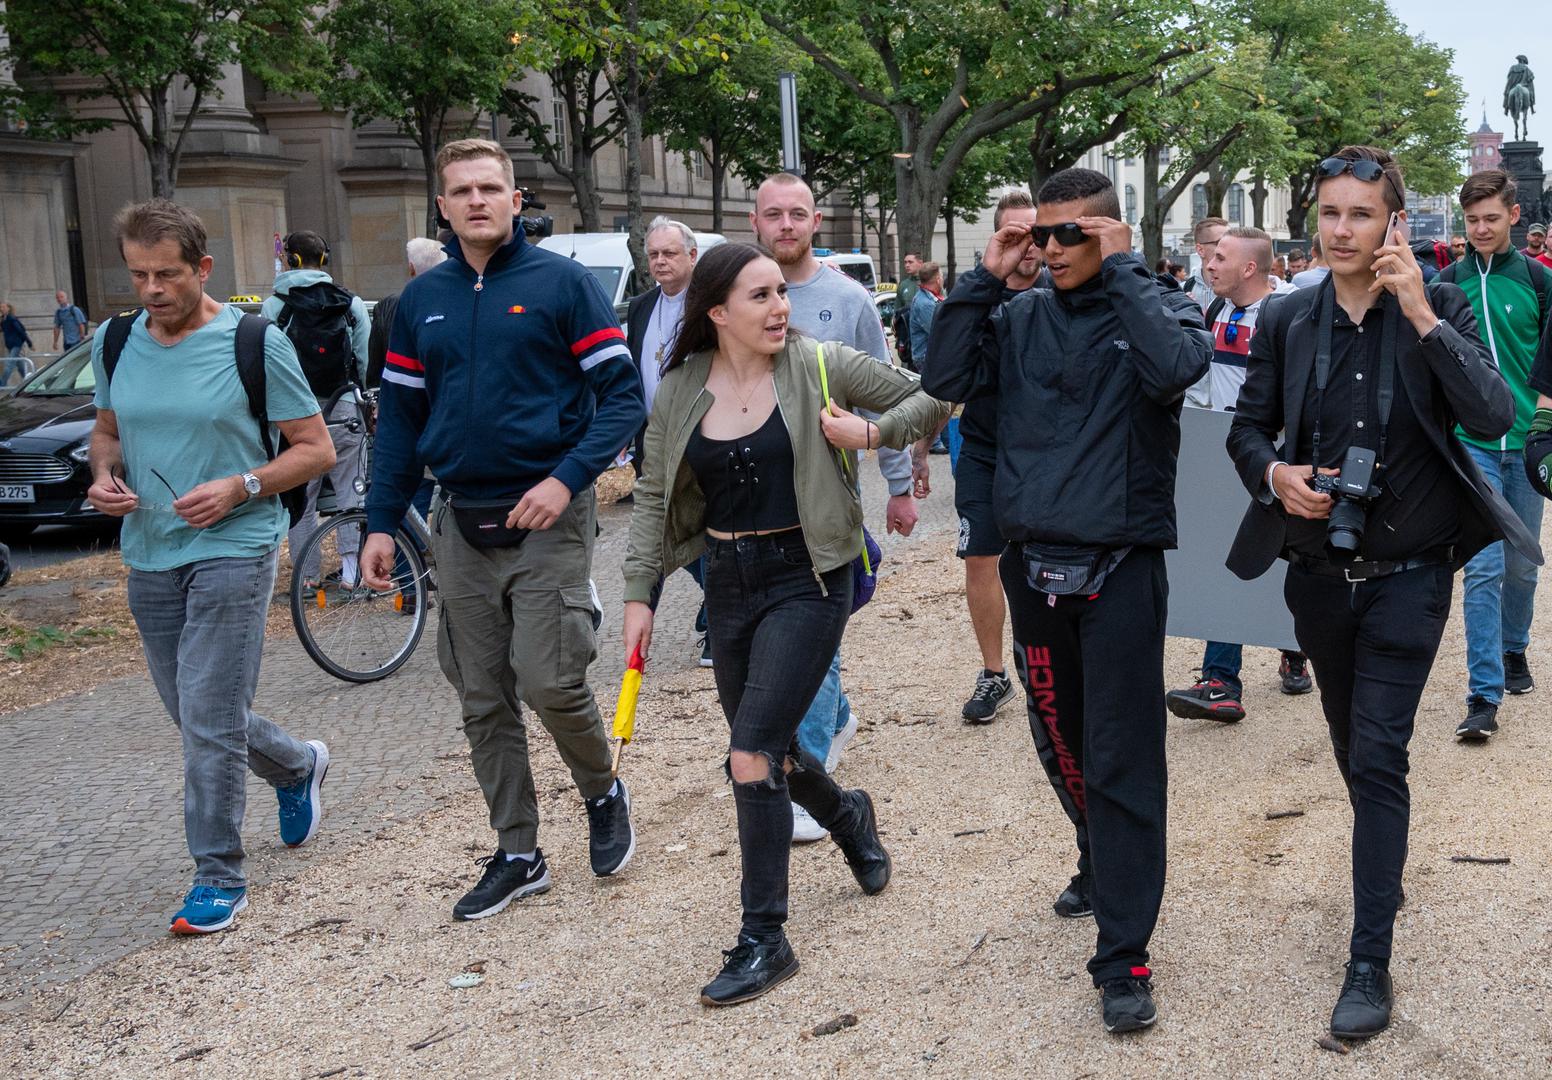 29 August 2020, Berlin: Chris Ares (2nd from left), German right-wing extremist rapper, comes to a demonstration against the Corona measures. Photo: Christophe Gateau/dpa /DPA/PIXSELL